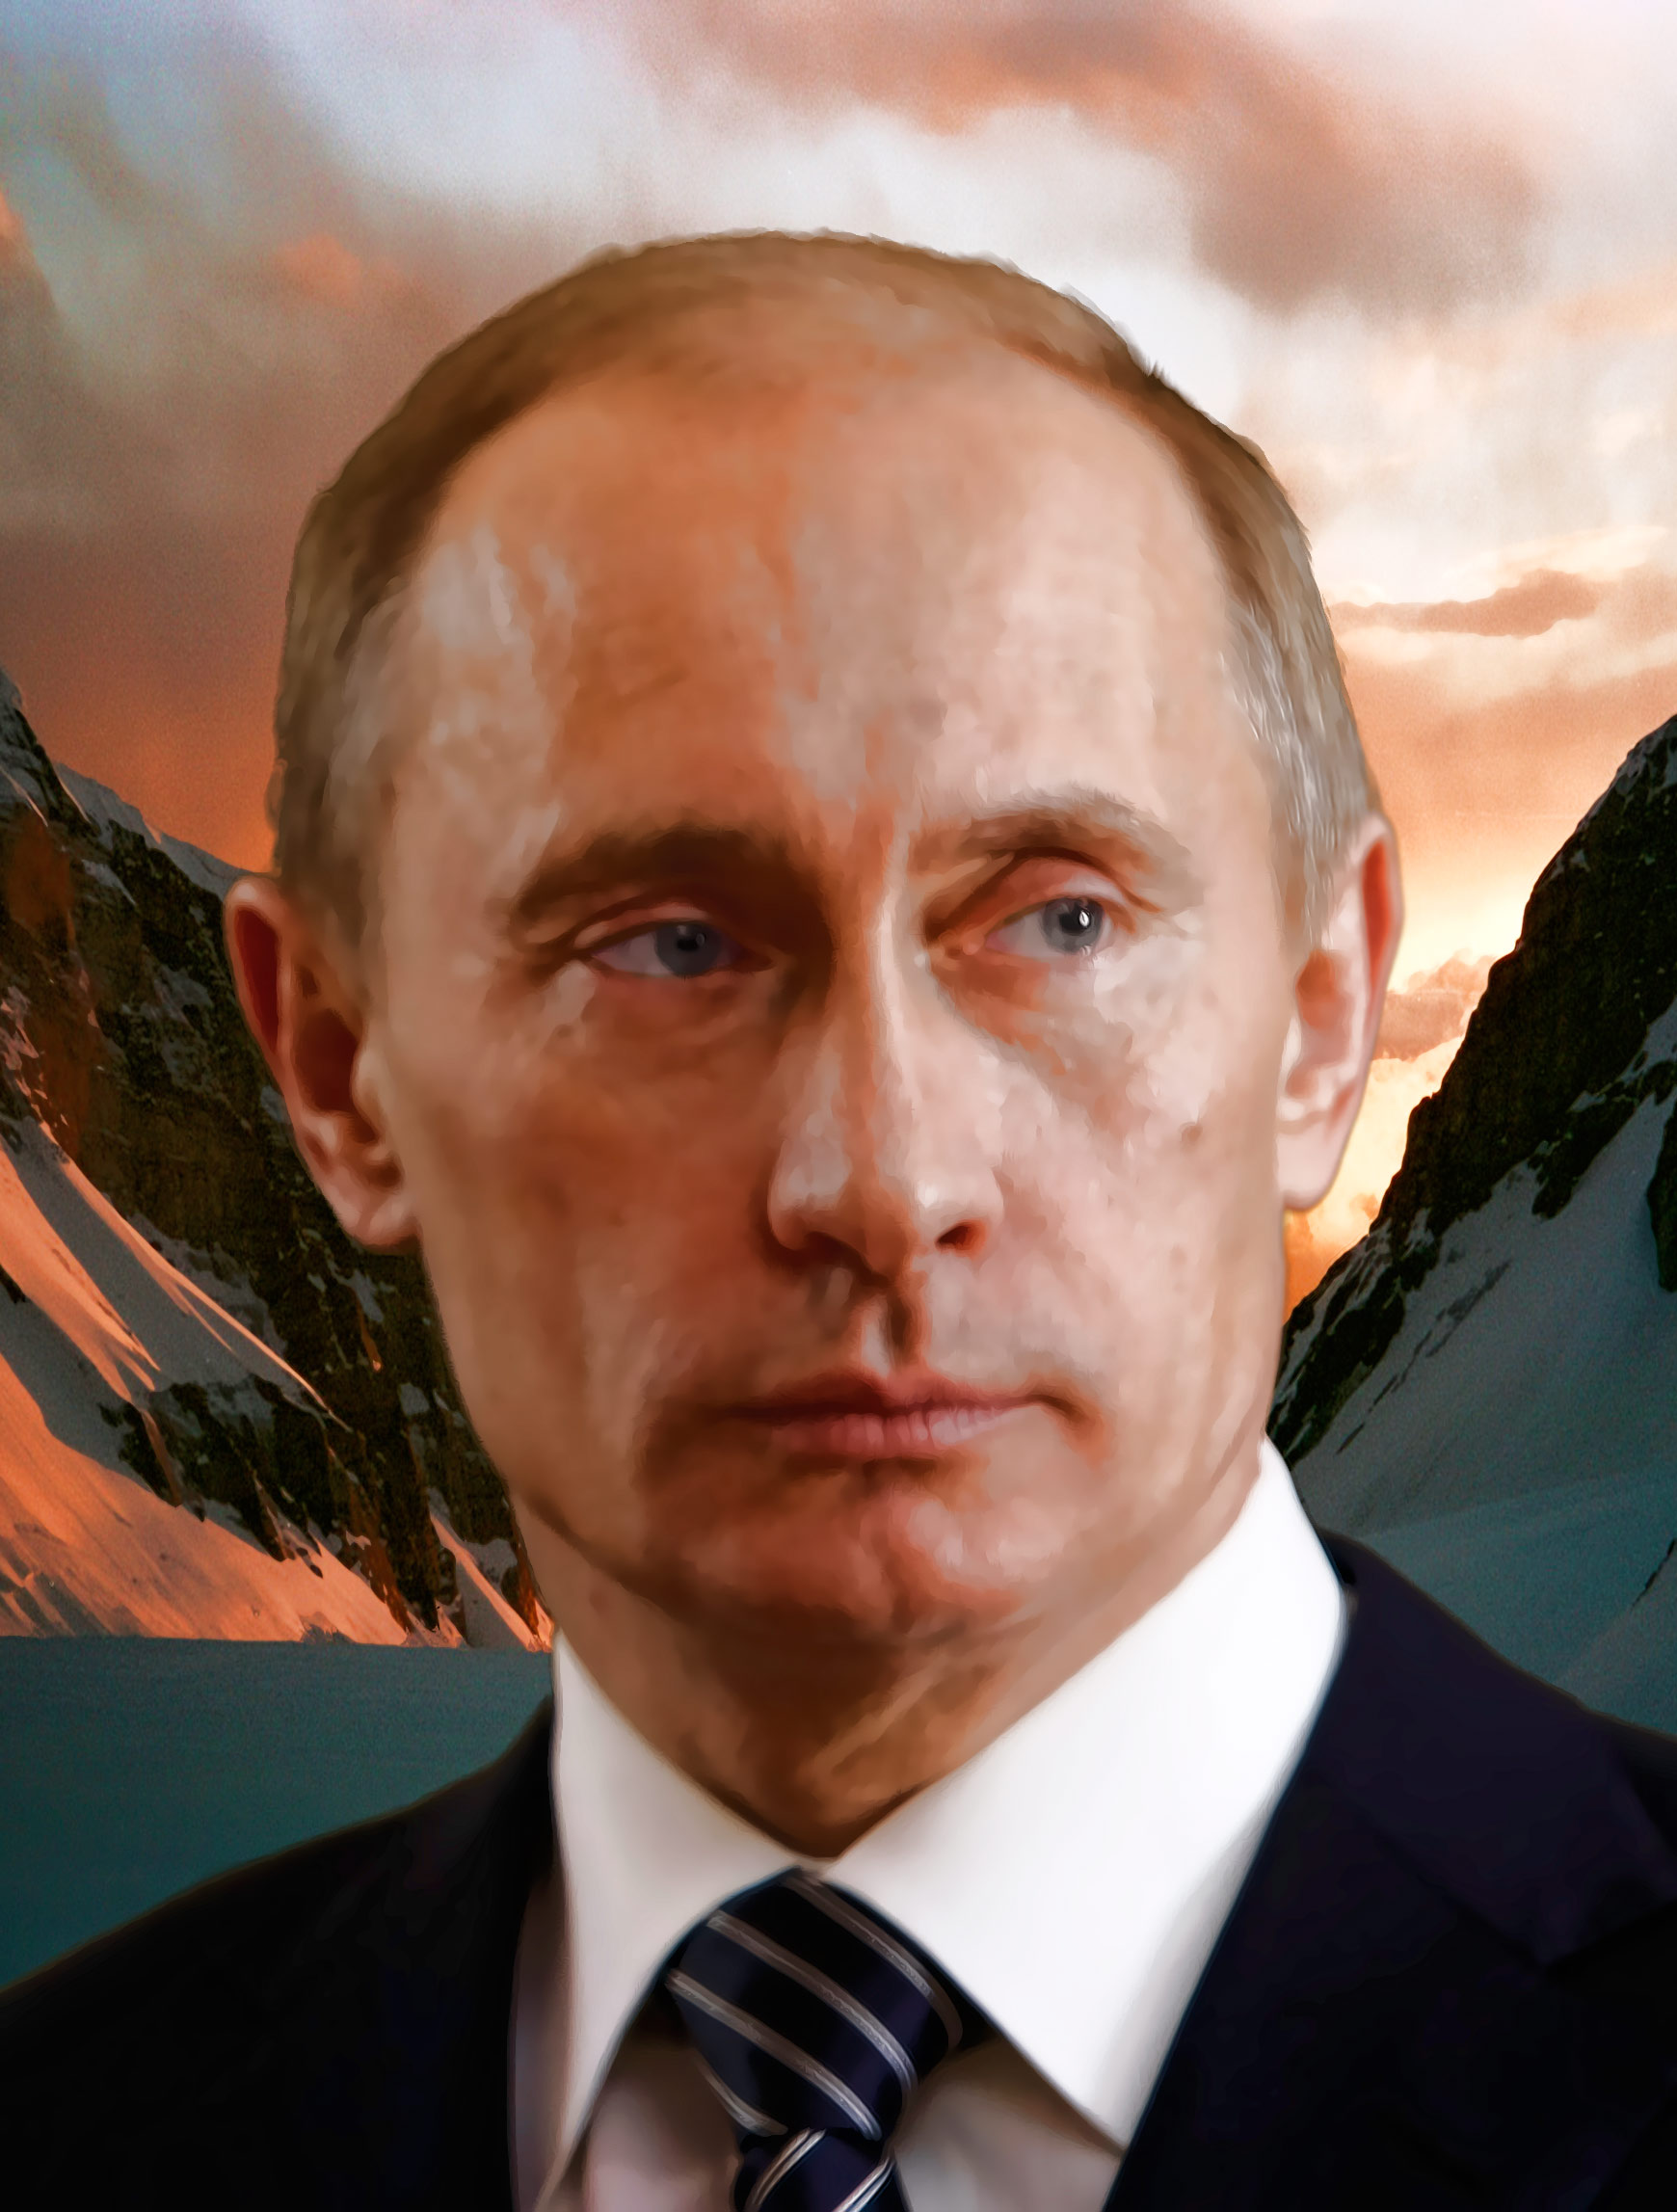 the-silent-coup-putin-vs-the-oligarchs-national-vanguard